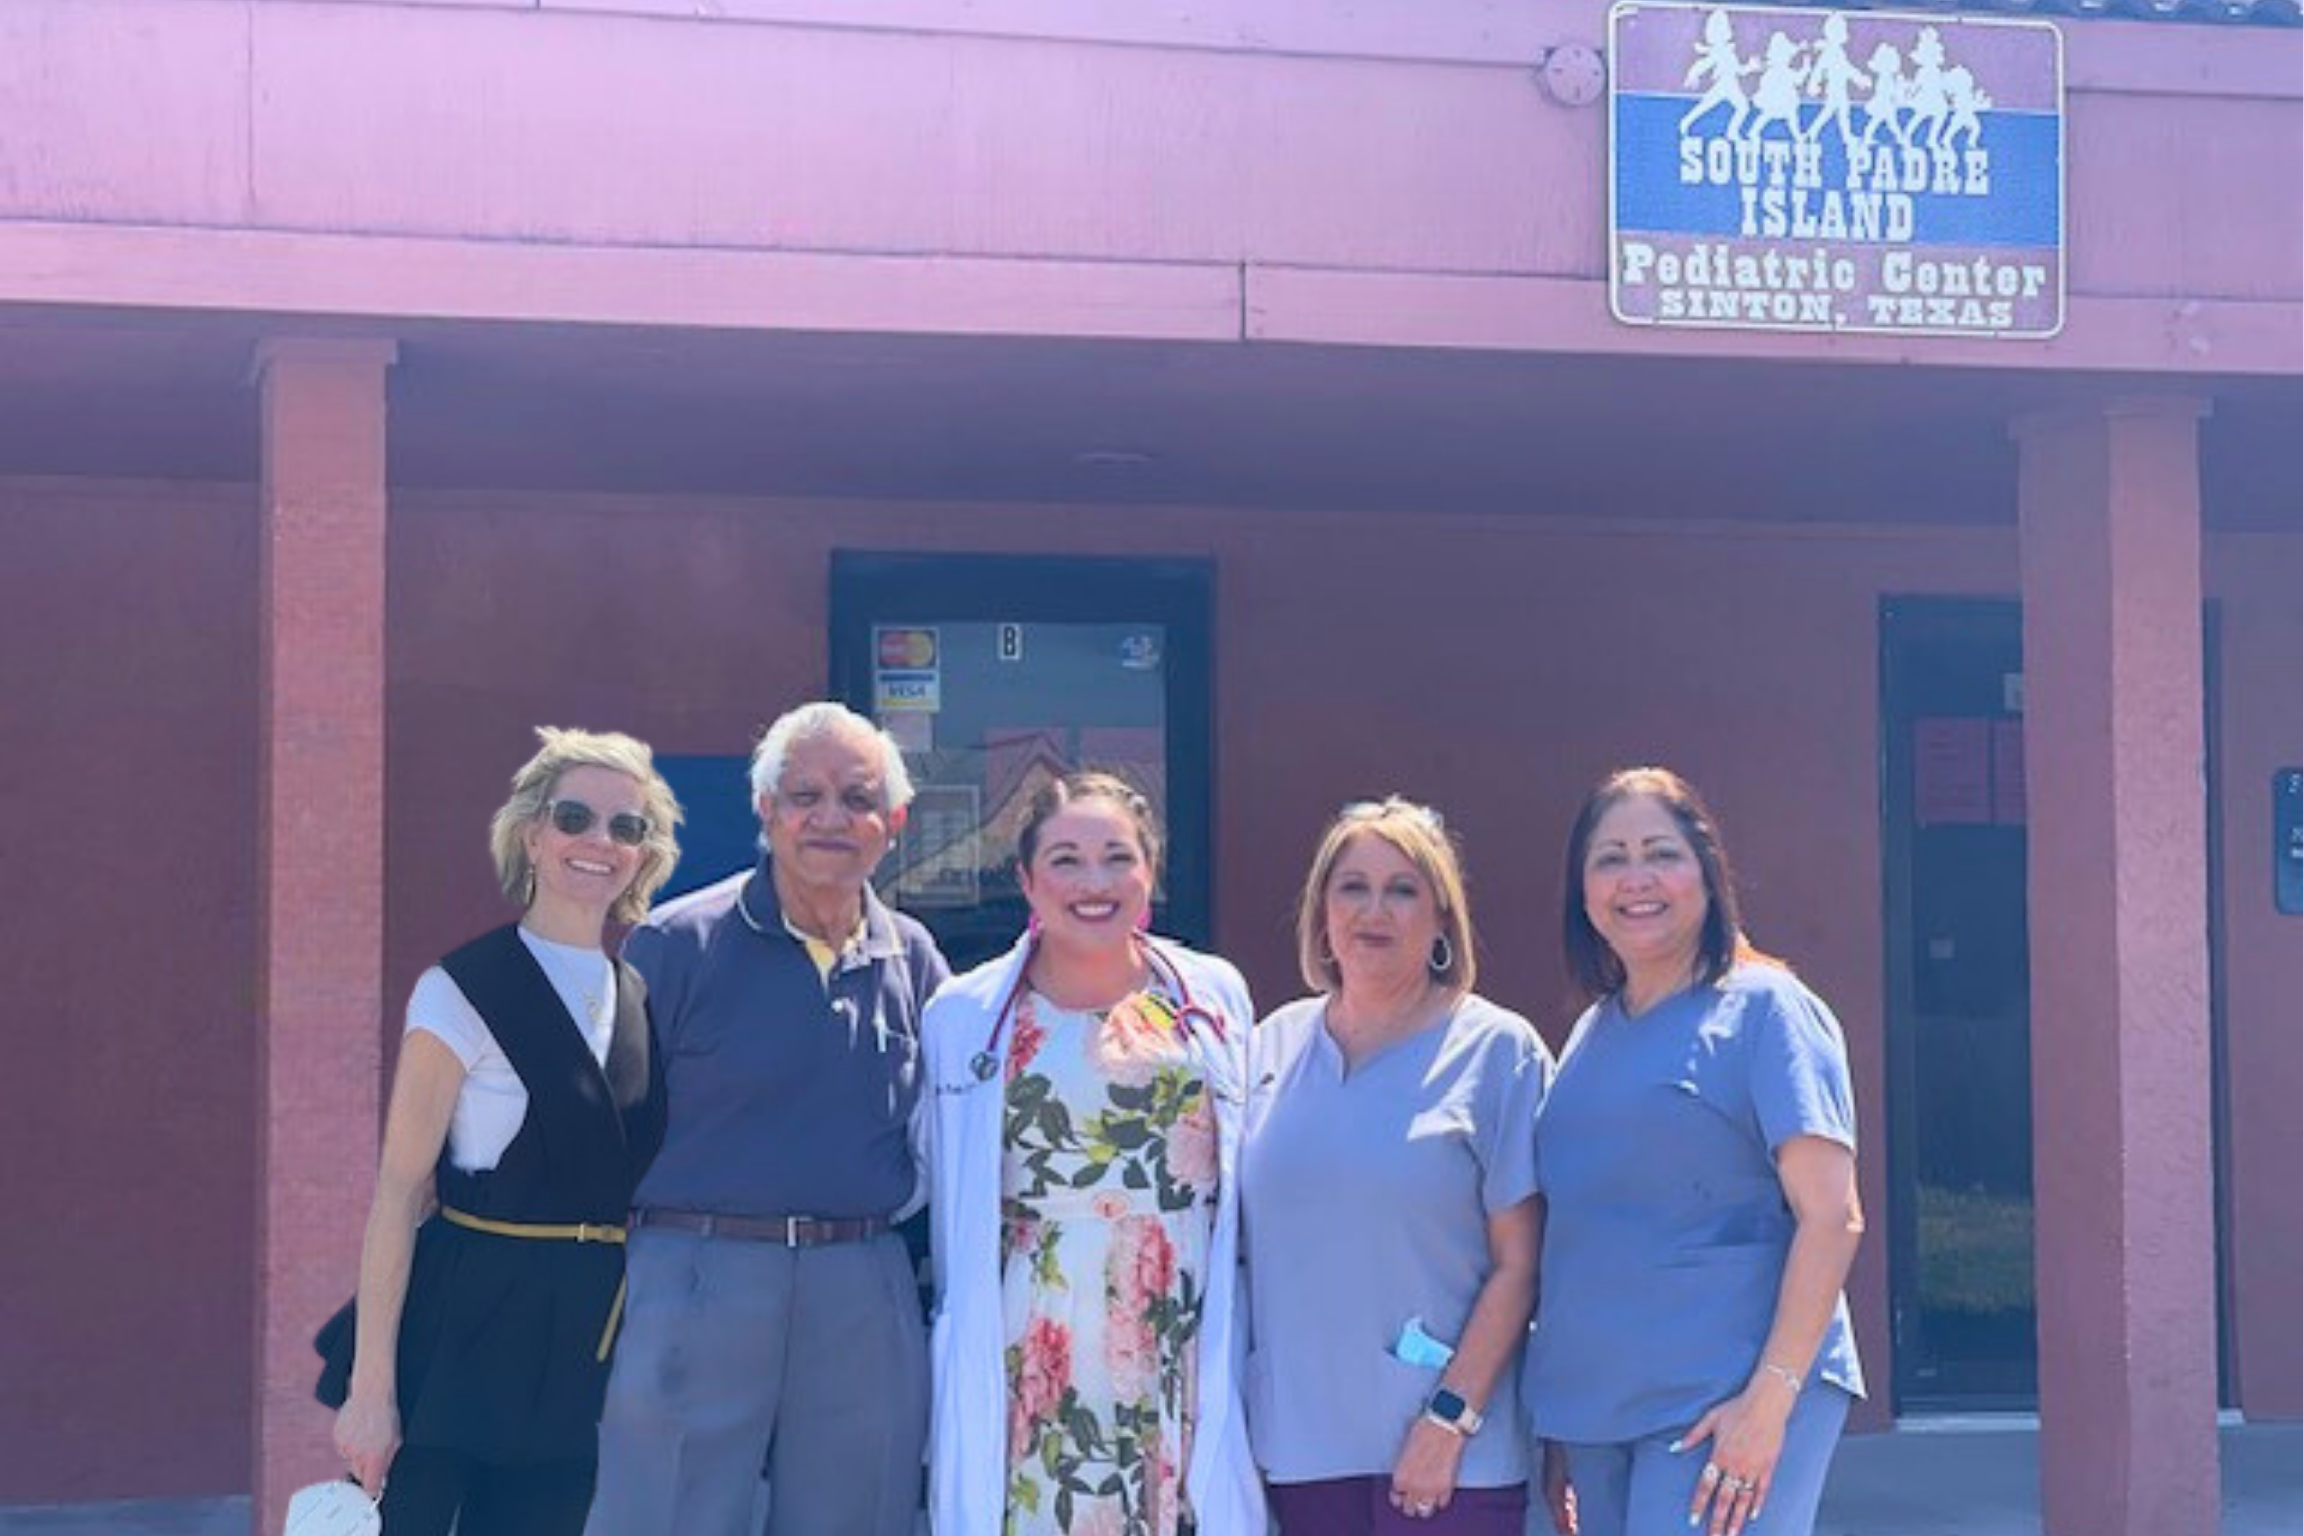 MyTown Health Partners Acquires South Padre Island Pediatrics Center to Extend Mission of Providing High-Quality & Accessible Care to Rural Communities in Texas